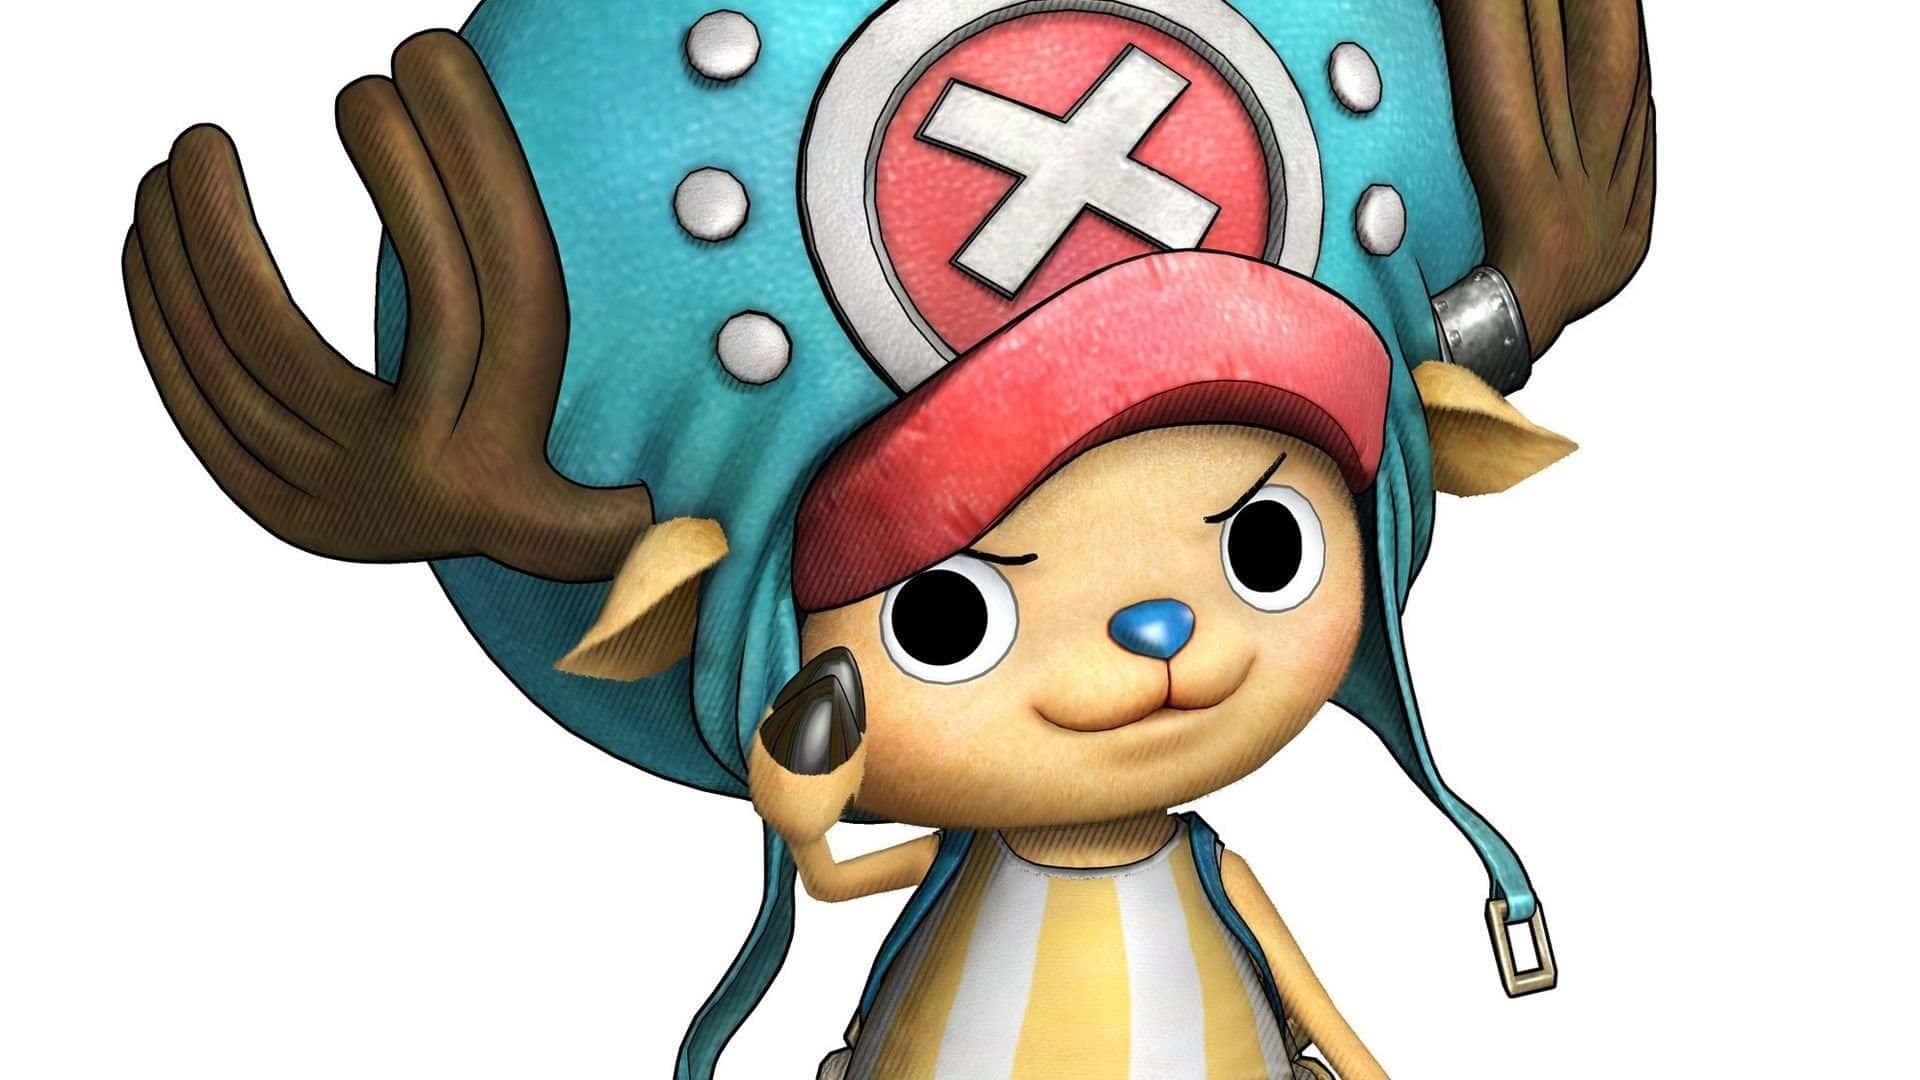 Animated One Piece Chopper Wallpaper